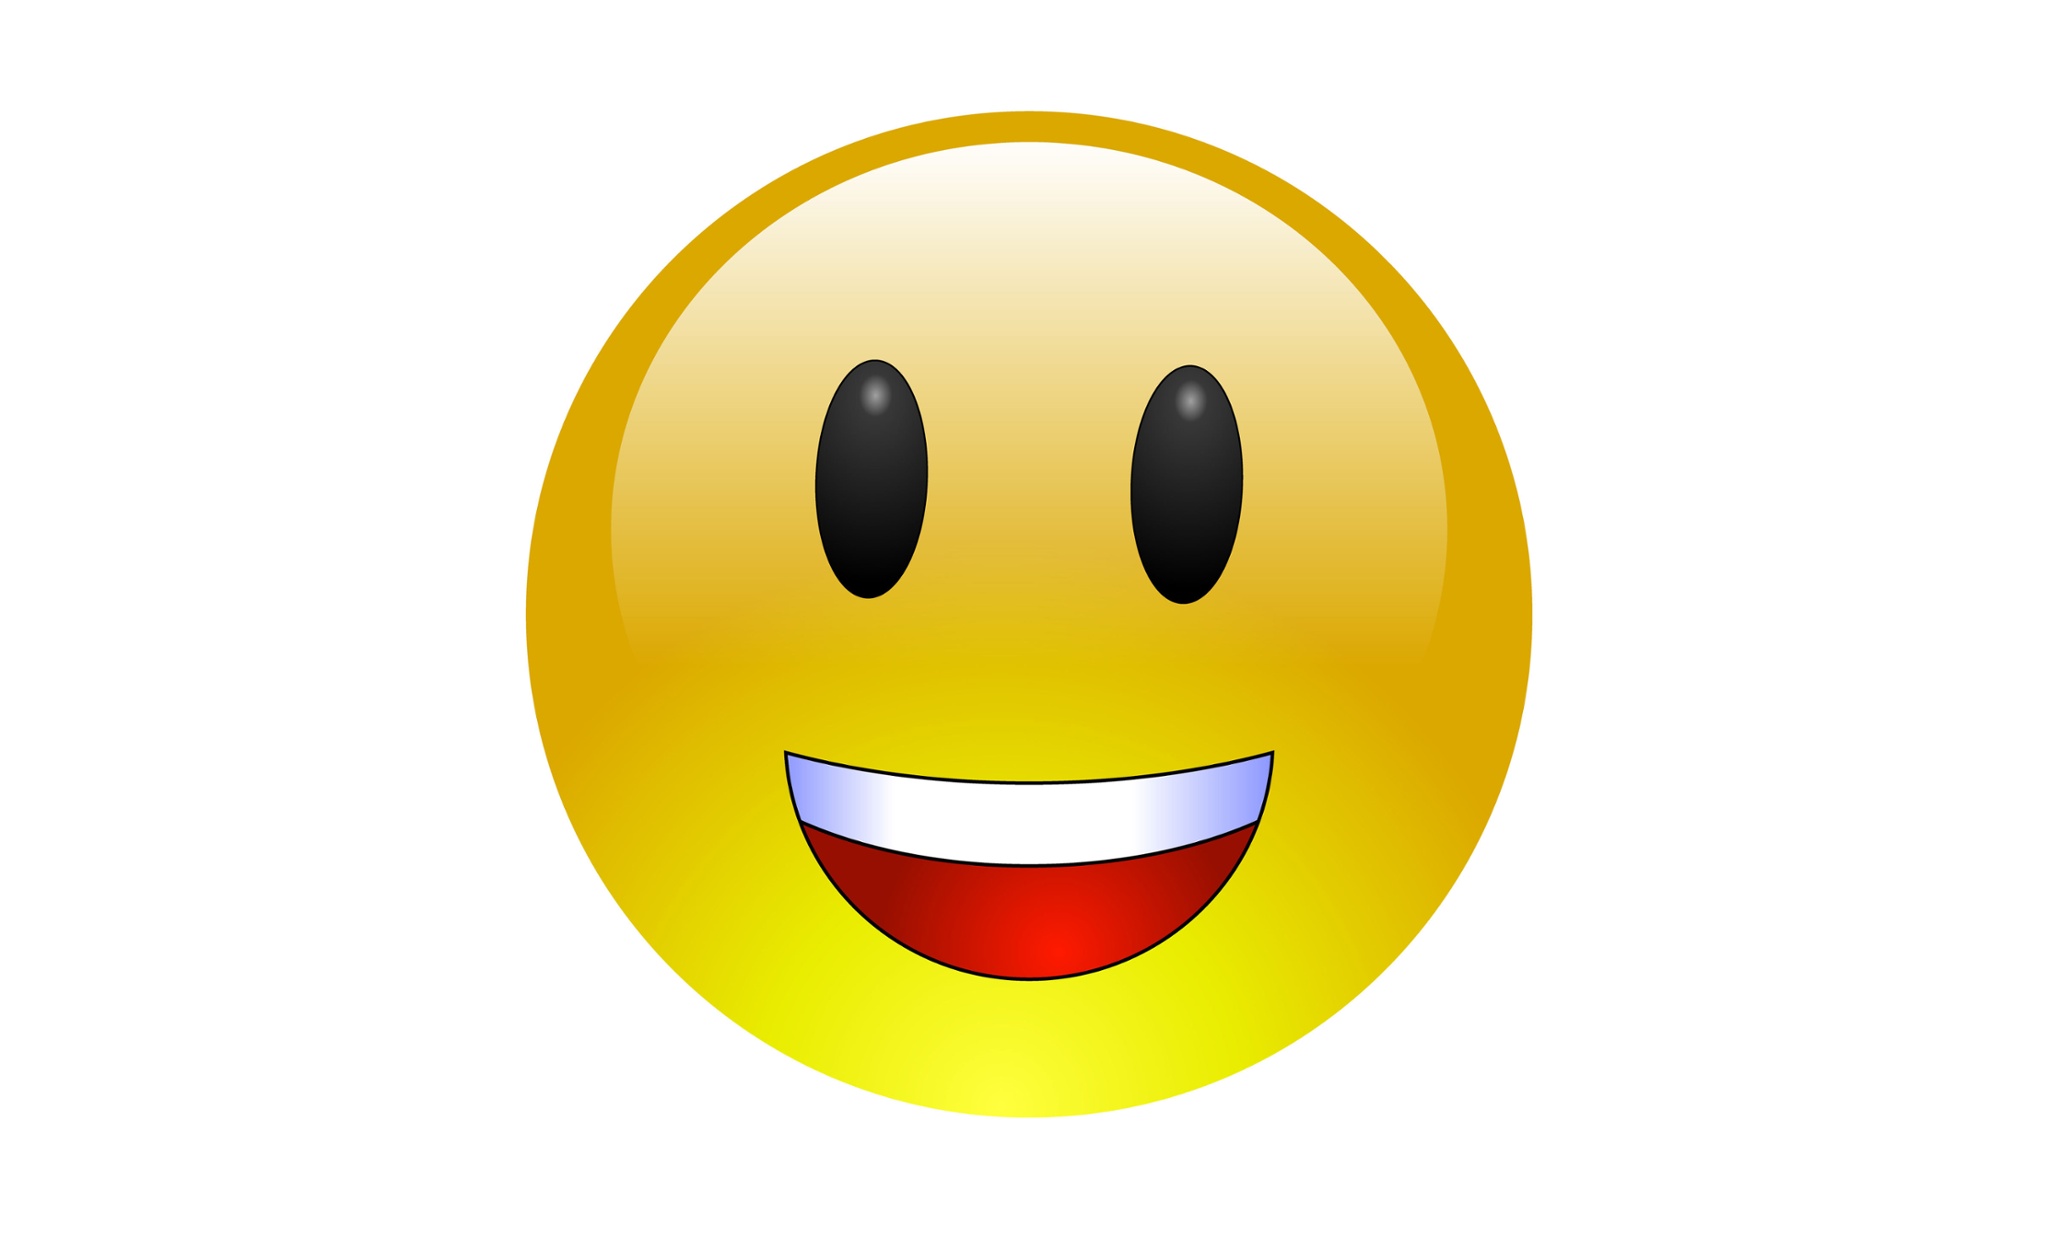 Smile: happy faces are top emoji choice | News | The Guardian